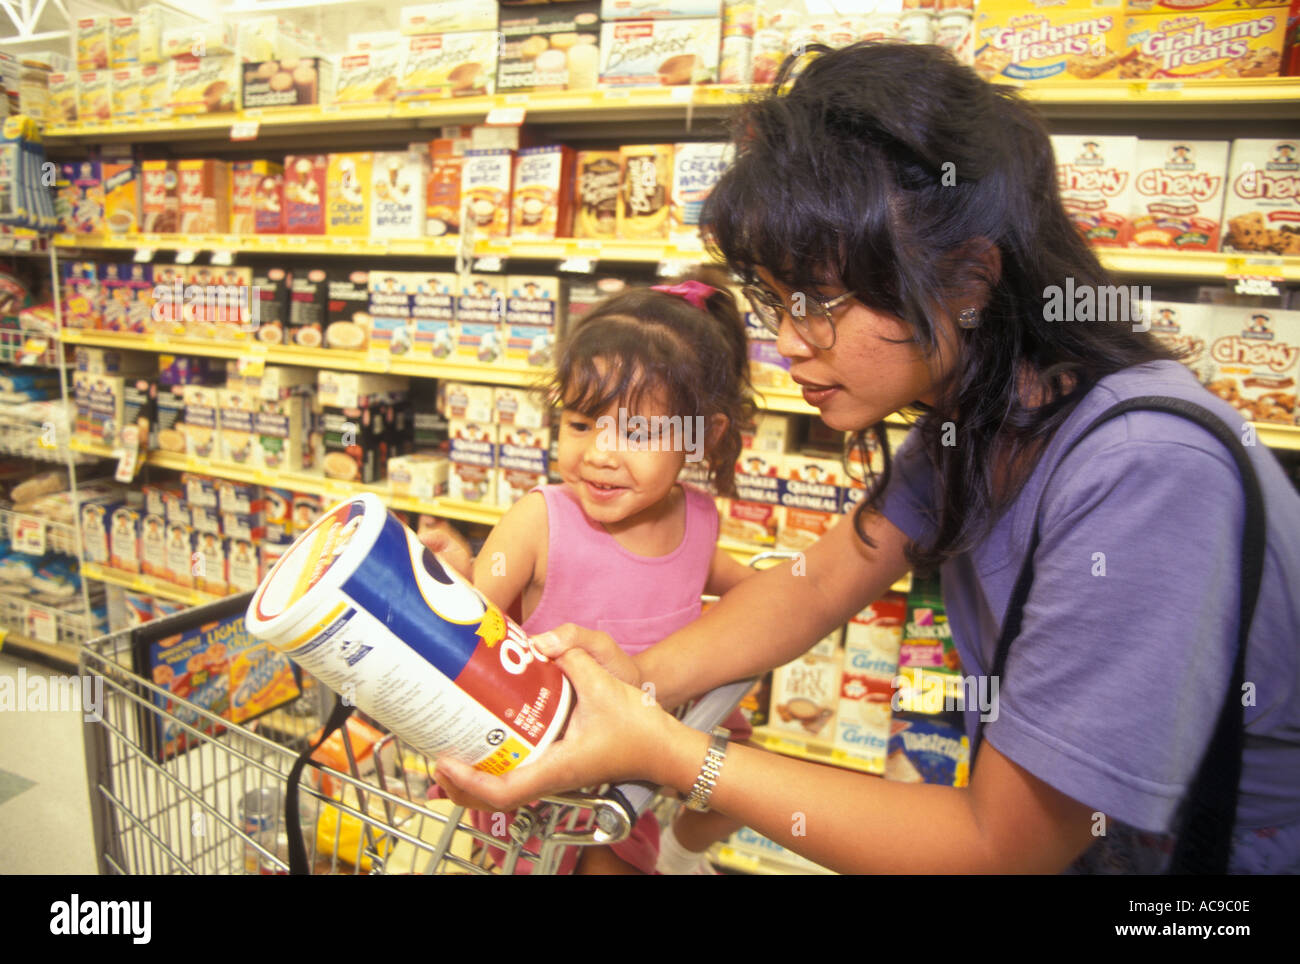 Asian American woman with daughter sitting shopping cart reading ingredients of quaker oats. mother teaching young girl . ©MR Myrleen Pearson Stock Photo